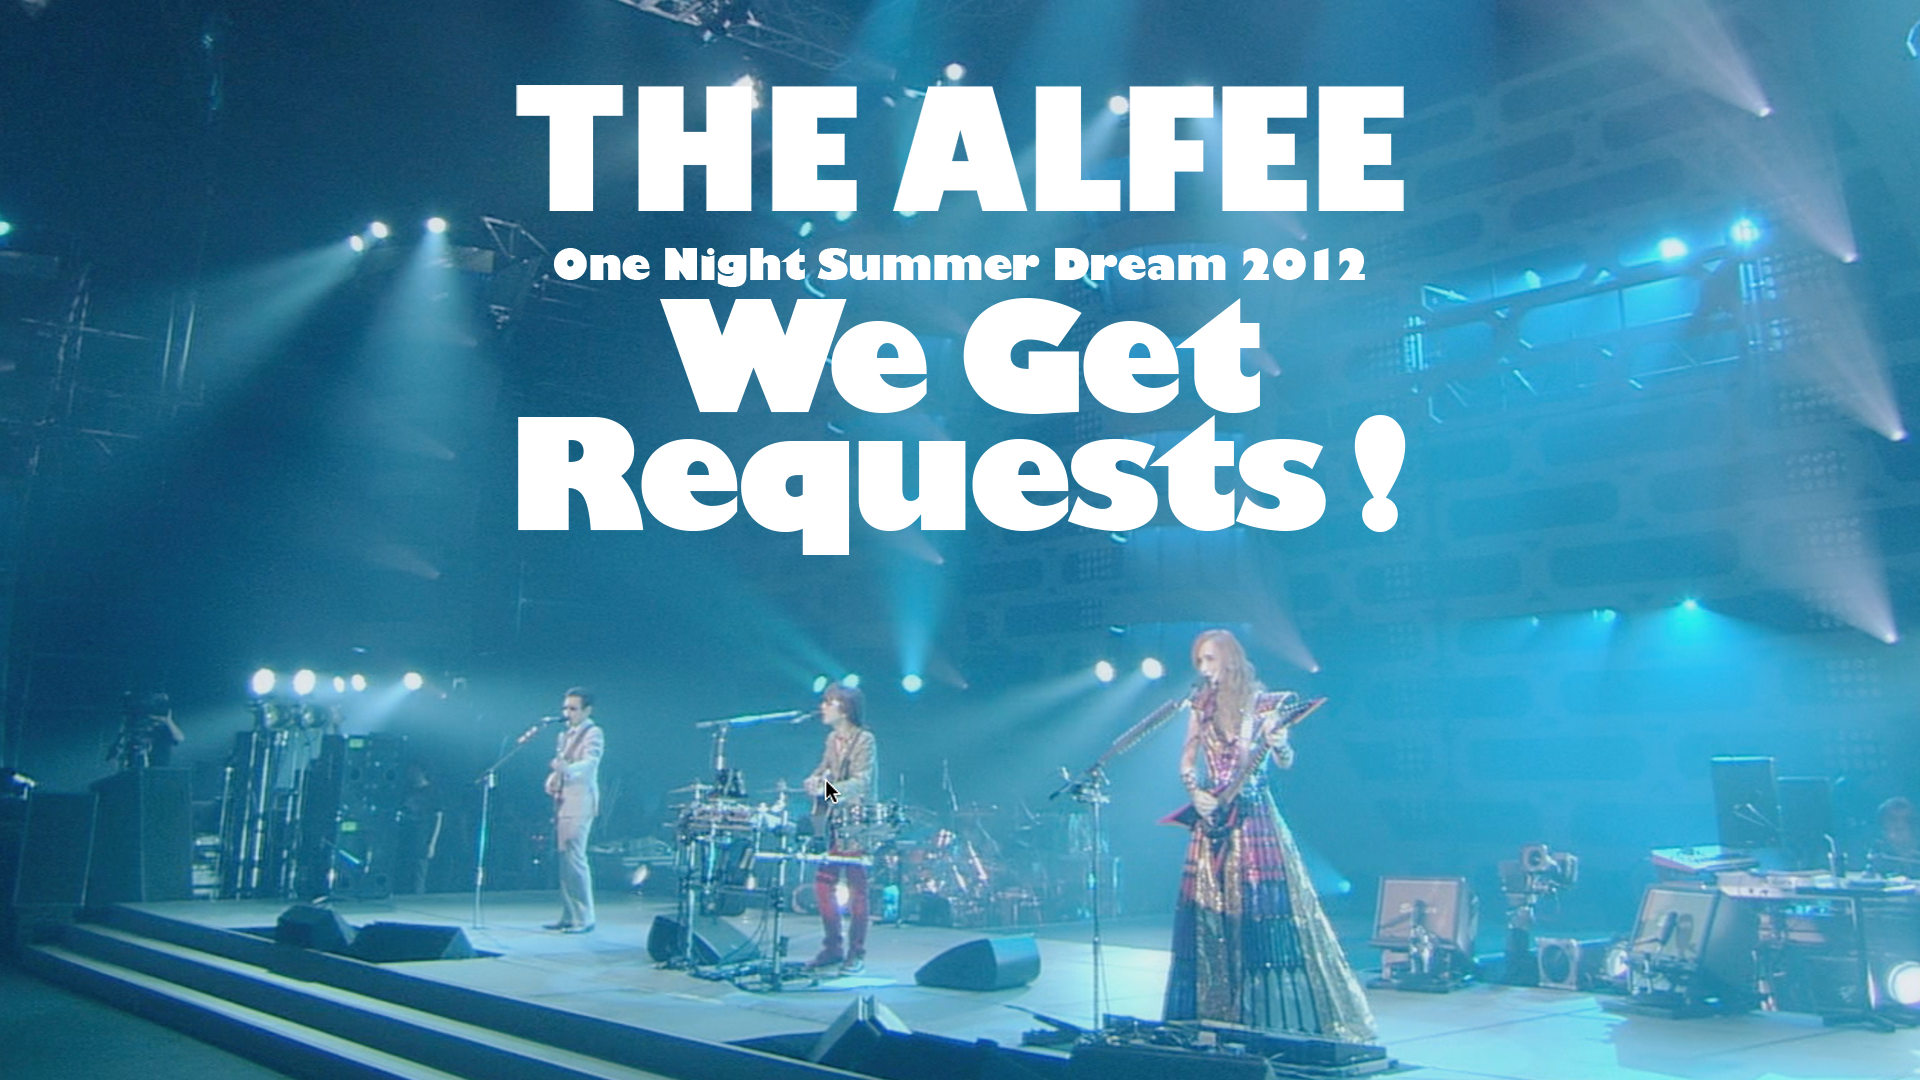 THE ALFEE One Night Summer Dream 2012 We Get Requests!(音楽 